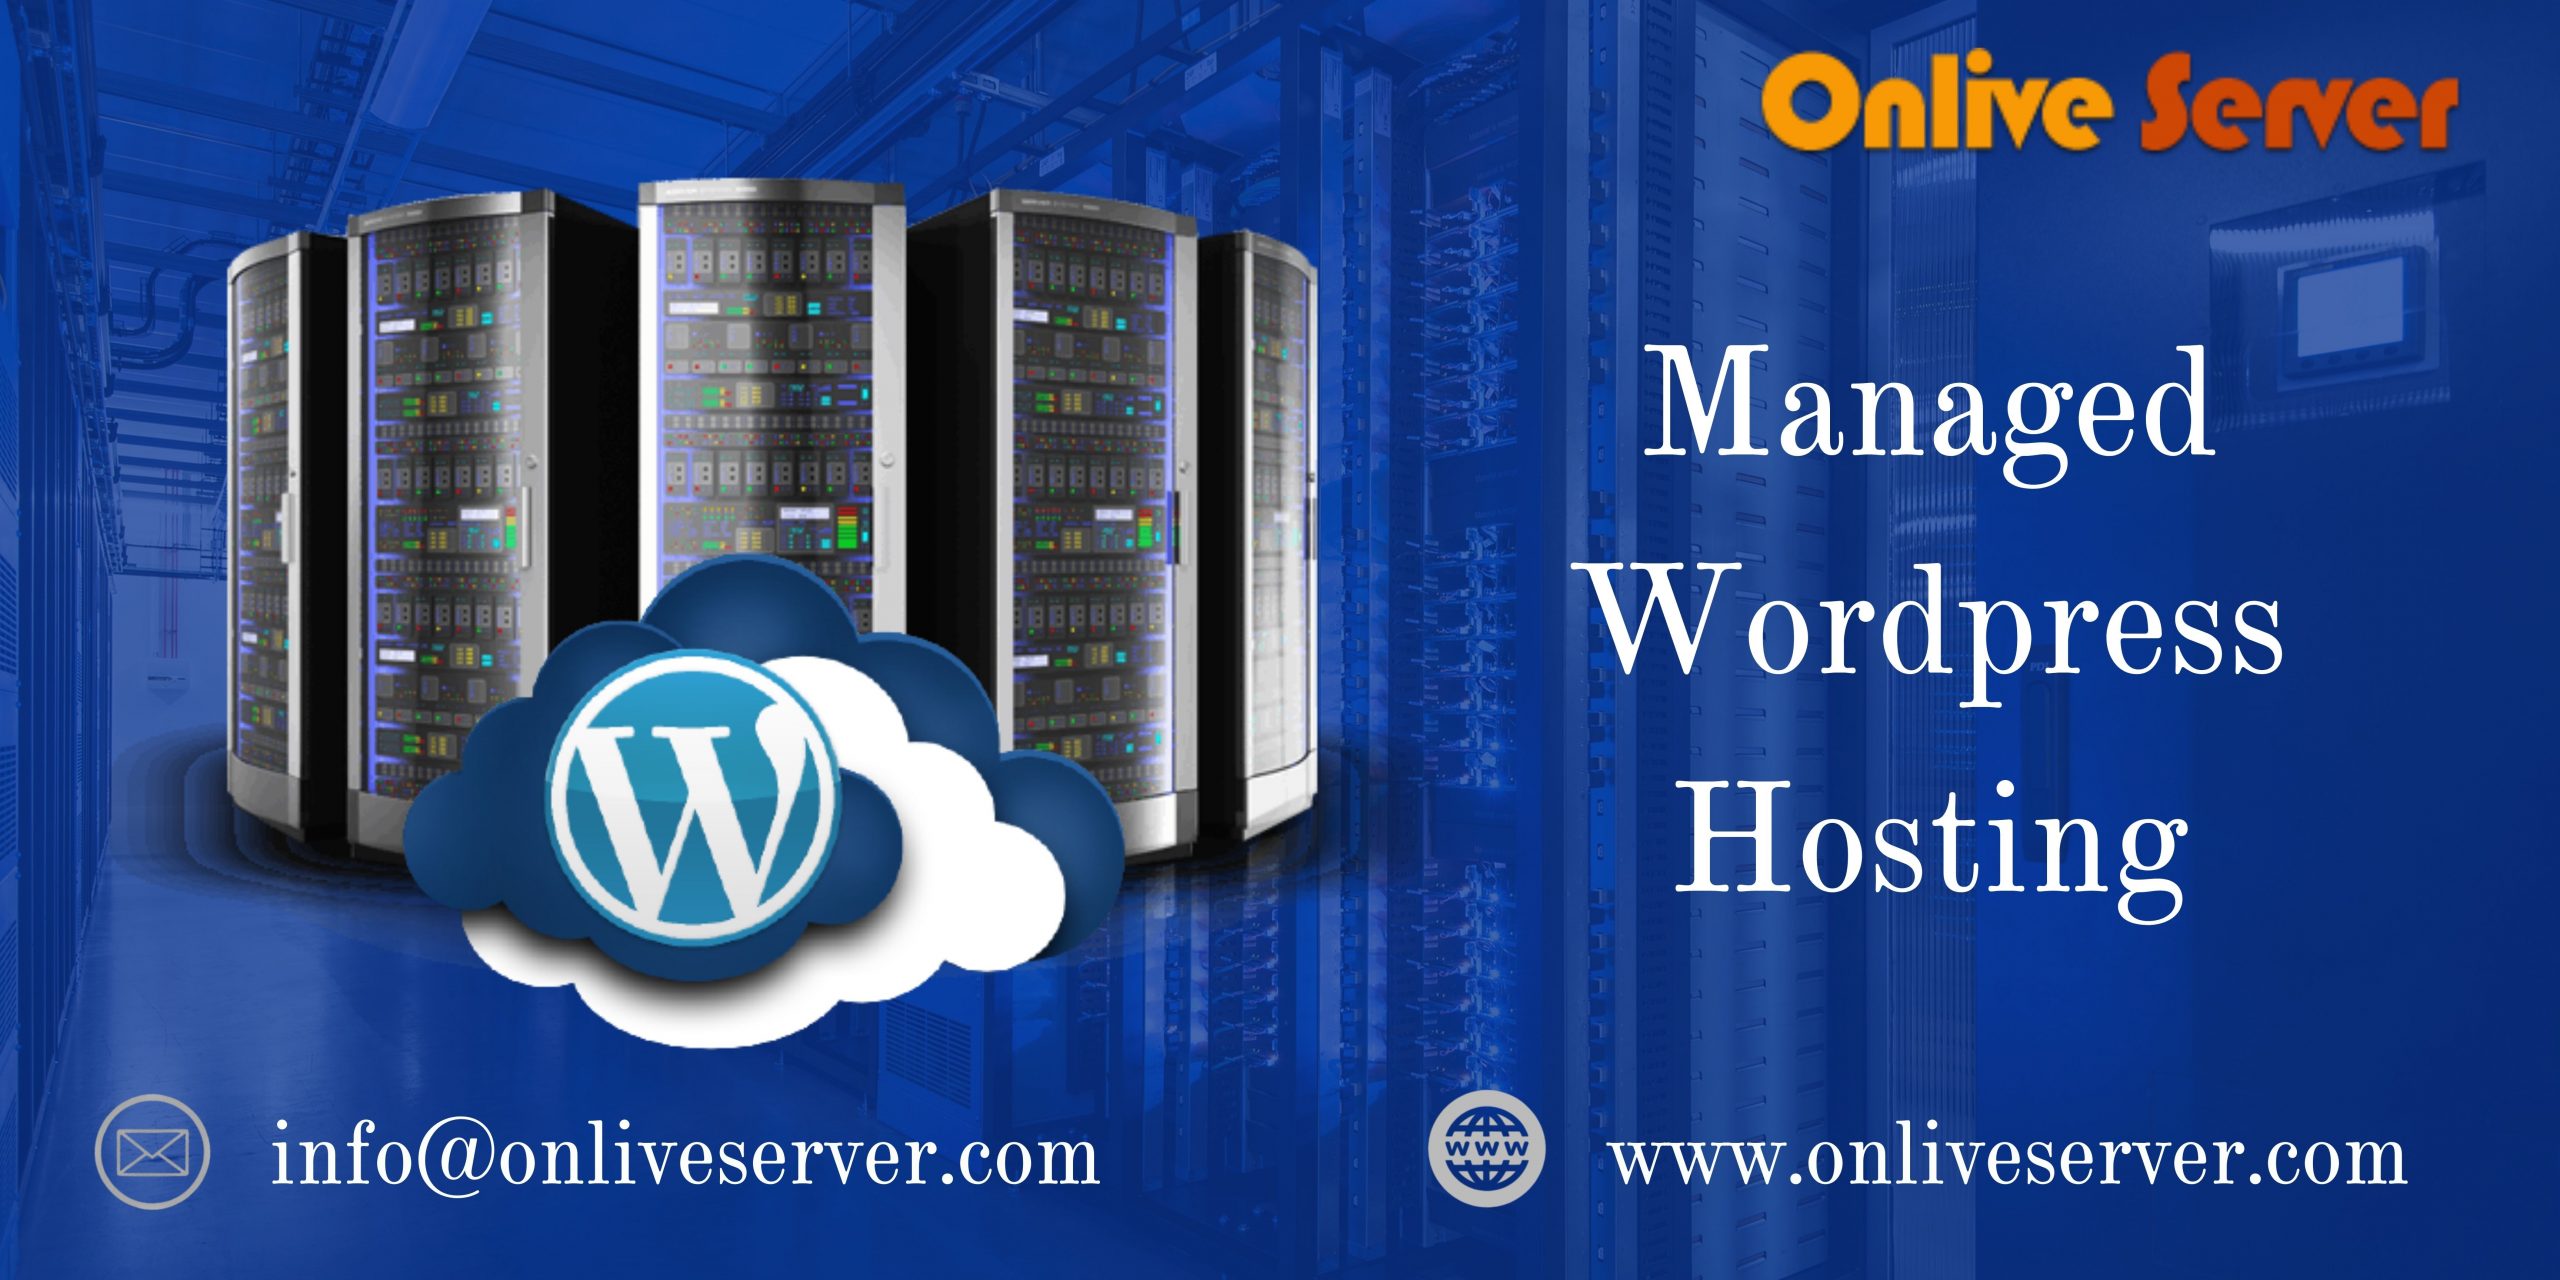 High Performance And Worlds Class Managed WordPress Hosting From Onlive Server